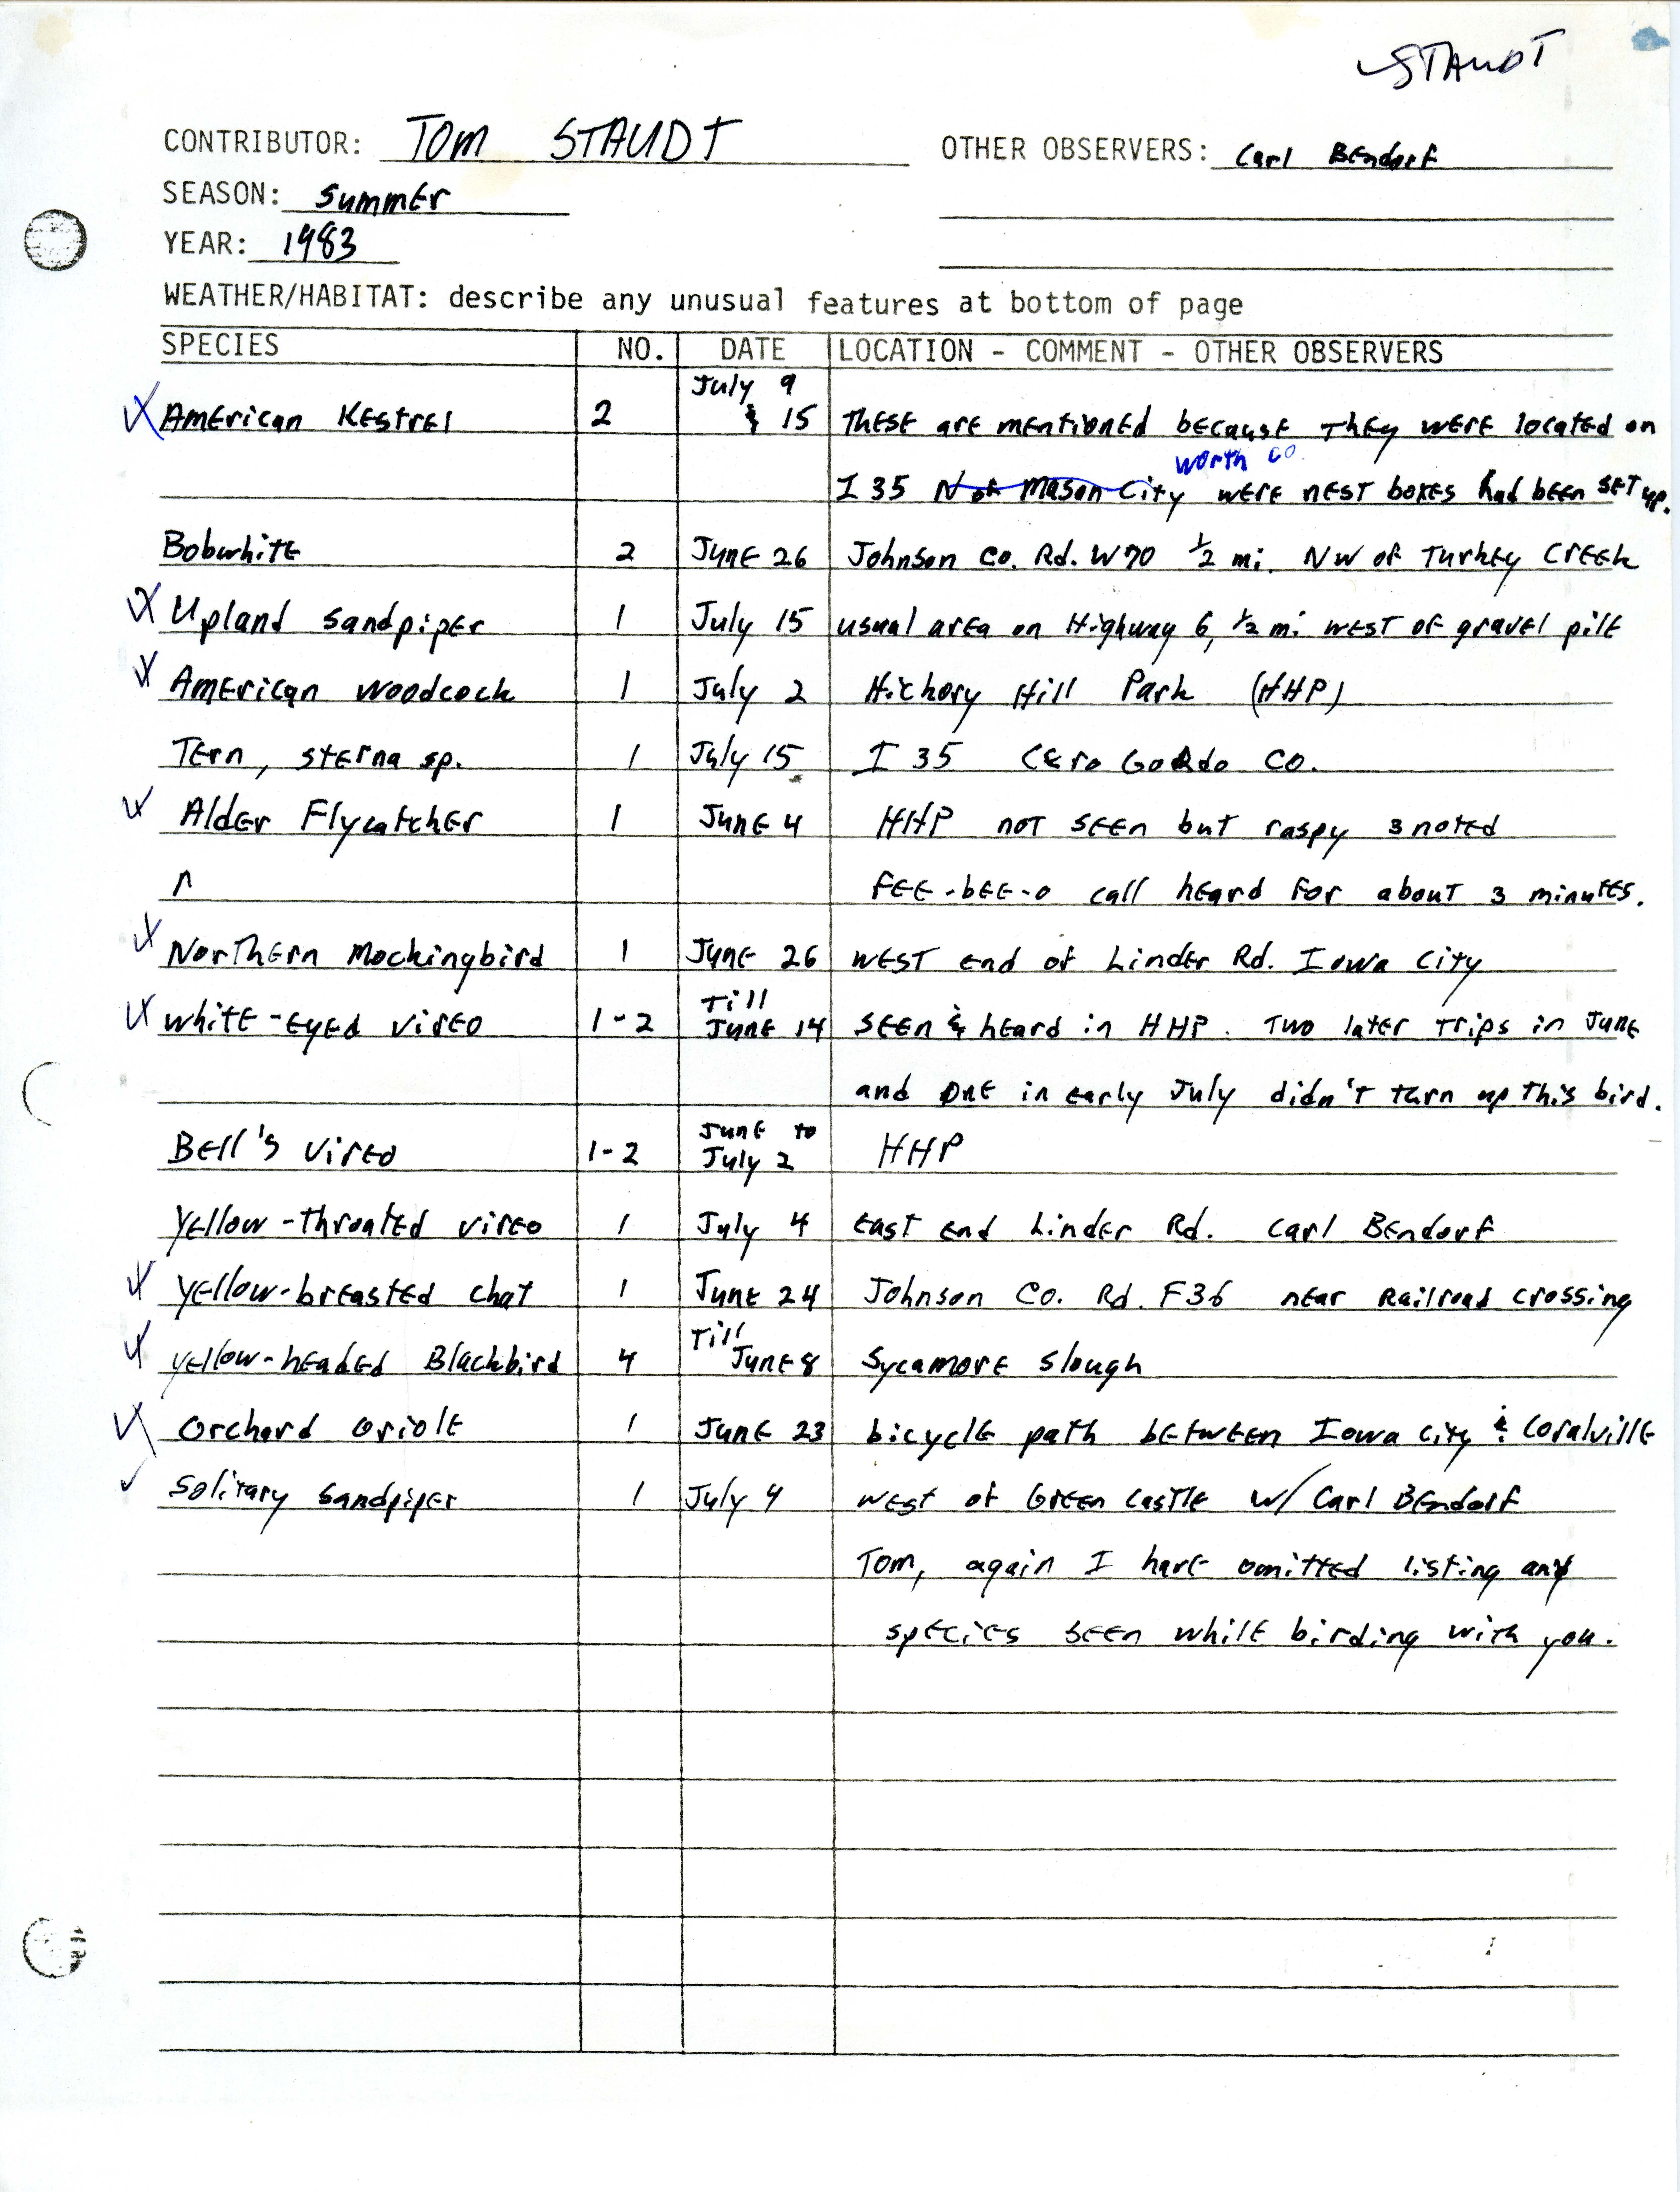 Annotated bird sighting list for Summer 1983 compiled by Tom Staudt